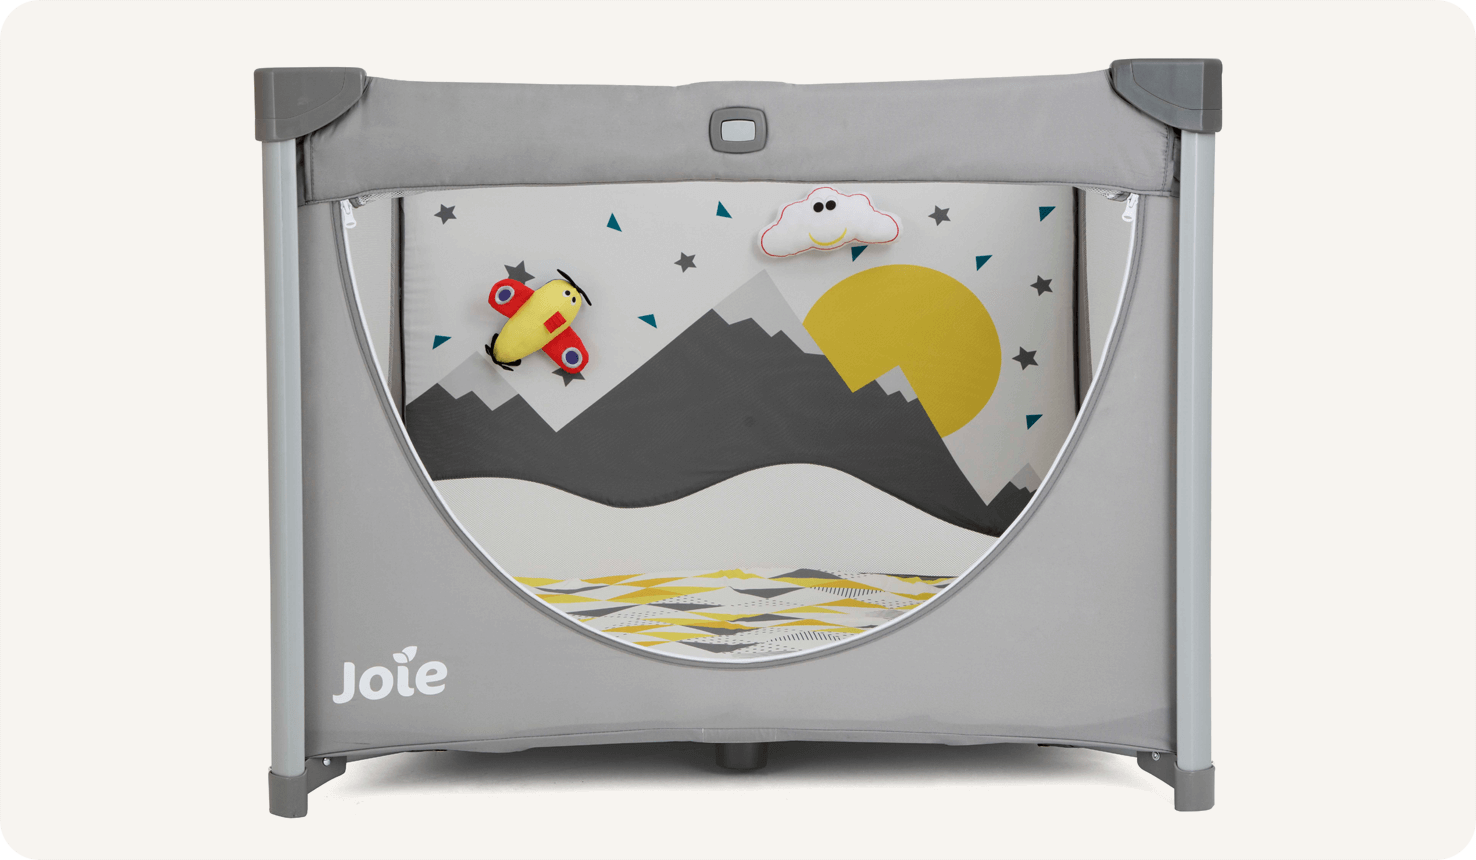 Joie Cheer playpen facing straight on, with mesh side panel unzipped to show mountain pattern inside the playpen.